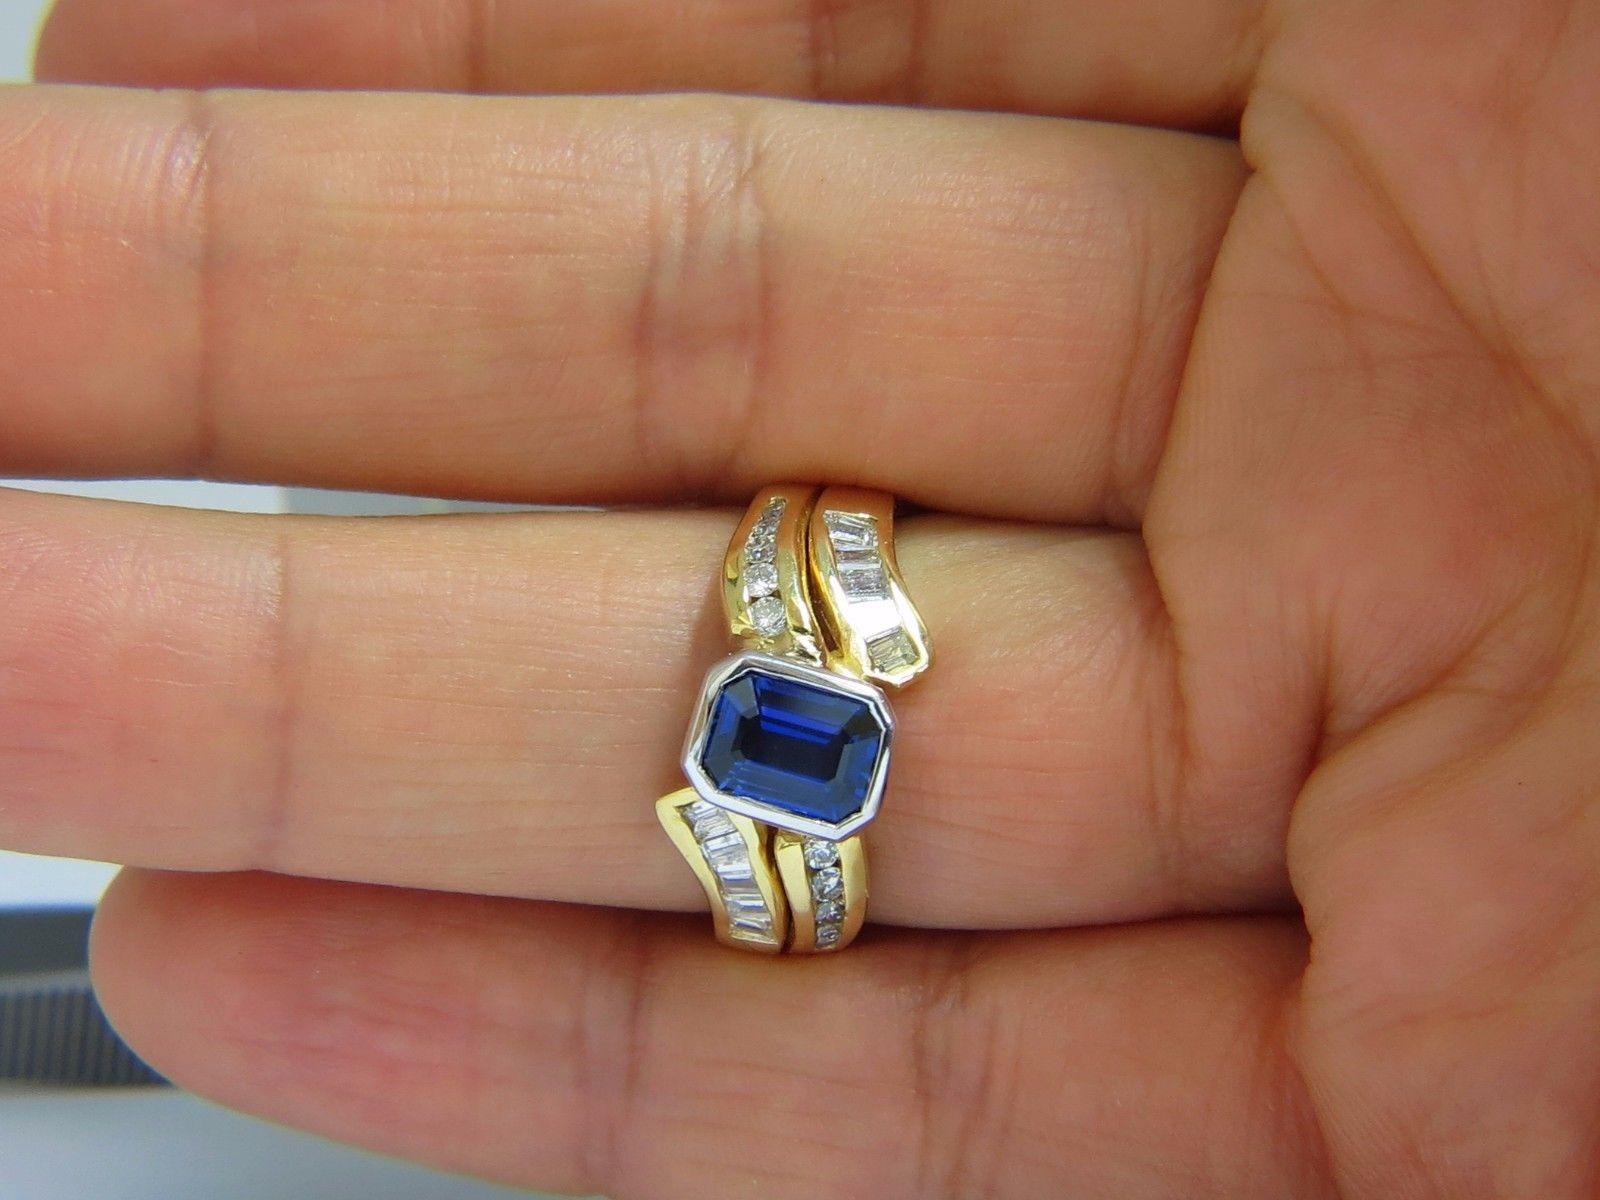 Bright Royal Blue

1.44ct. Natural Blue Sapphire

7.2 X 5.5mm diameter

Full cut emerald brilliant 

Clean Clarity & Transparent

1.00ct. Diamonds.

H-color Si-1 clarity.

  14kt. yellow gold

7.8 grams

Ring Current size: 9.75

(Free Resize